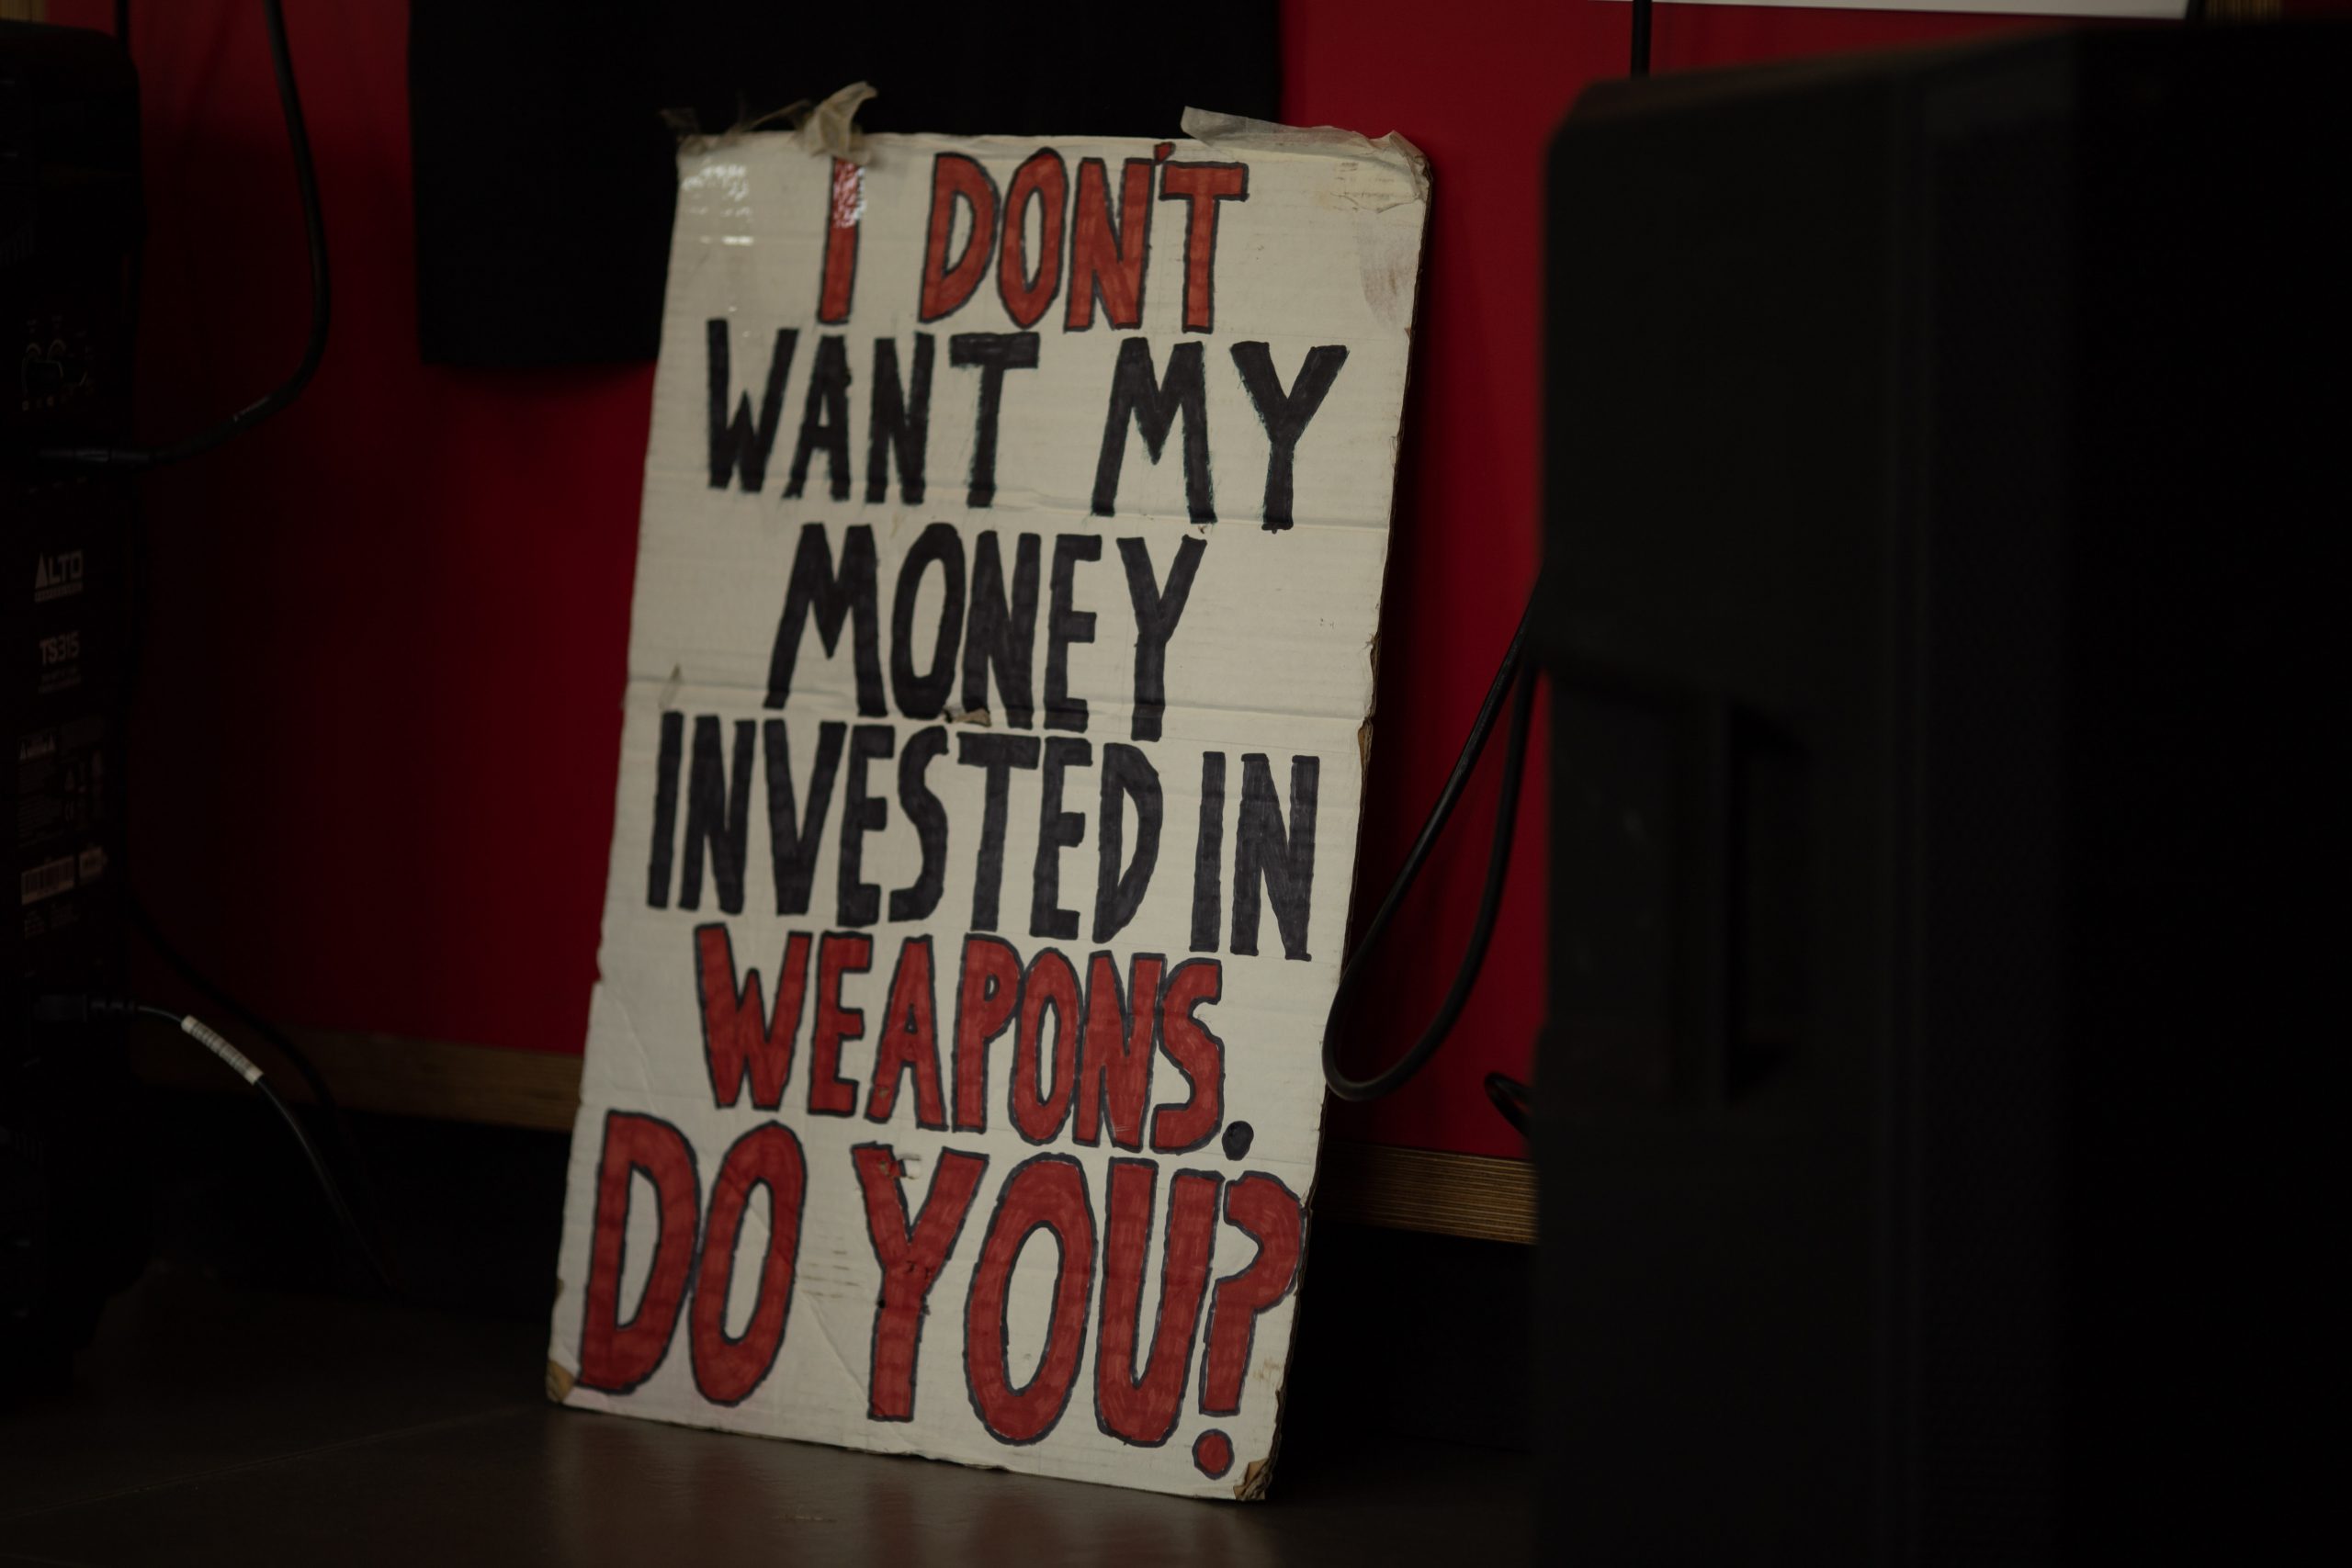 Banner that reads 'I don't want my money invested in weapons. Do you?'